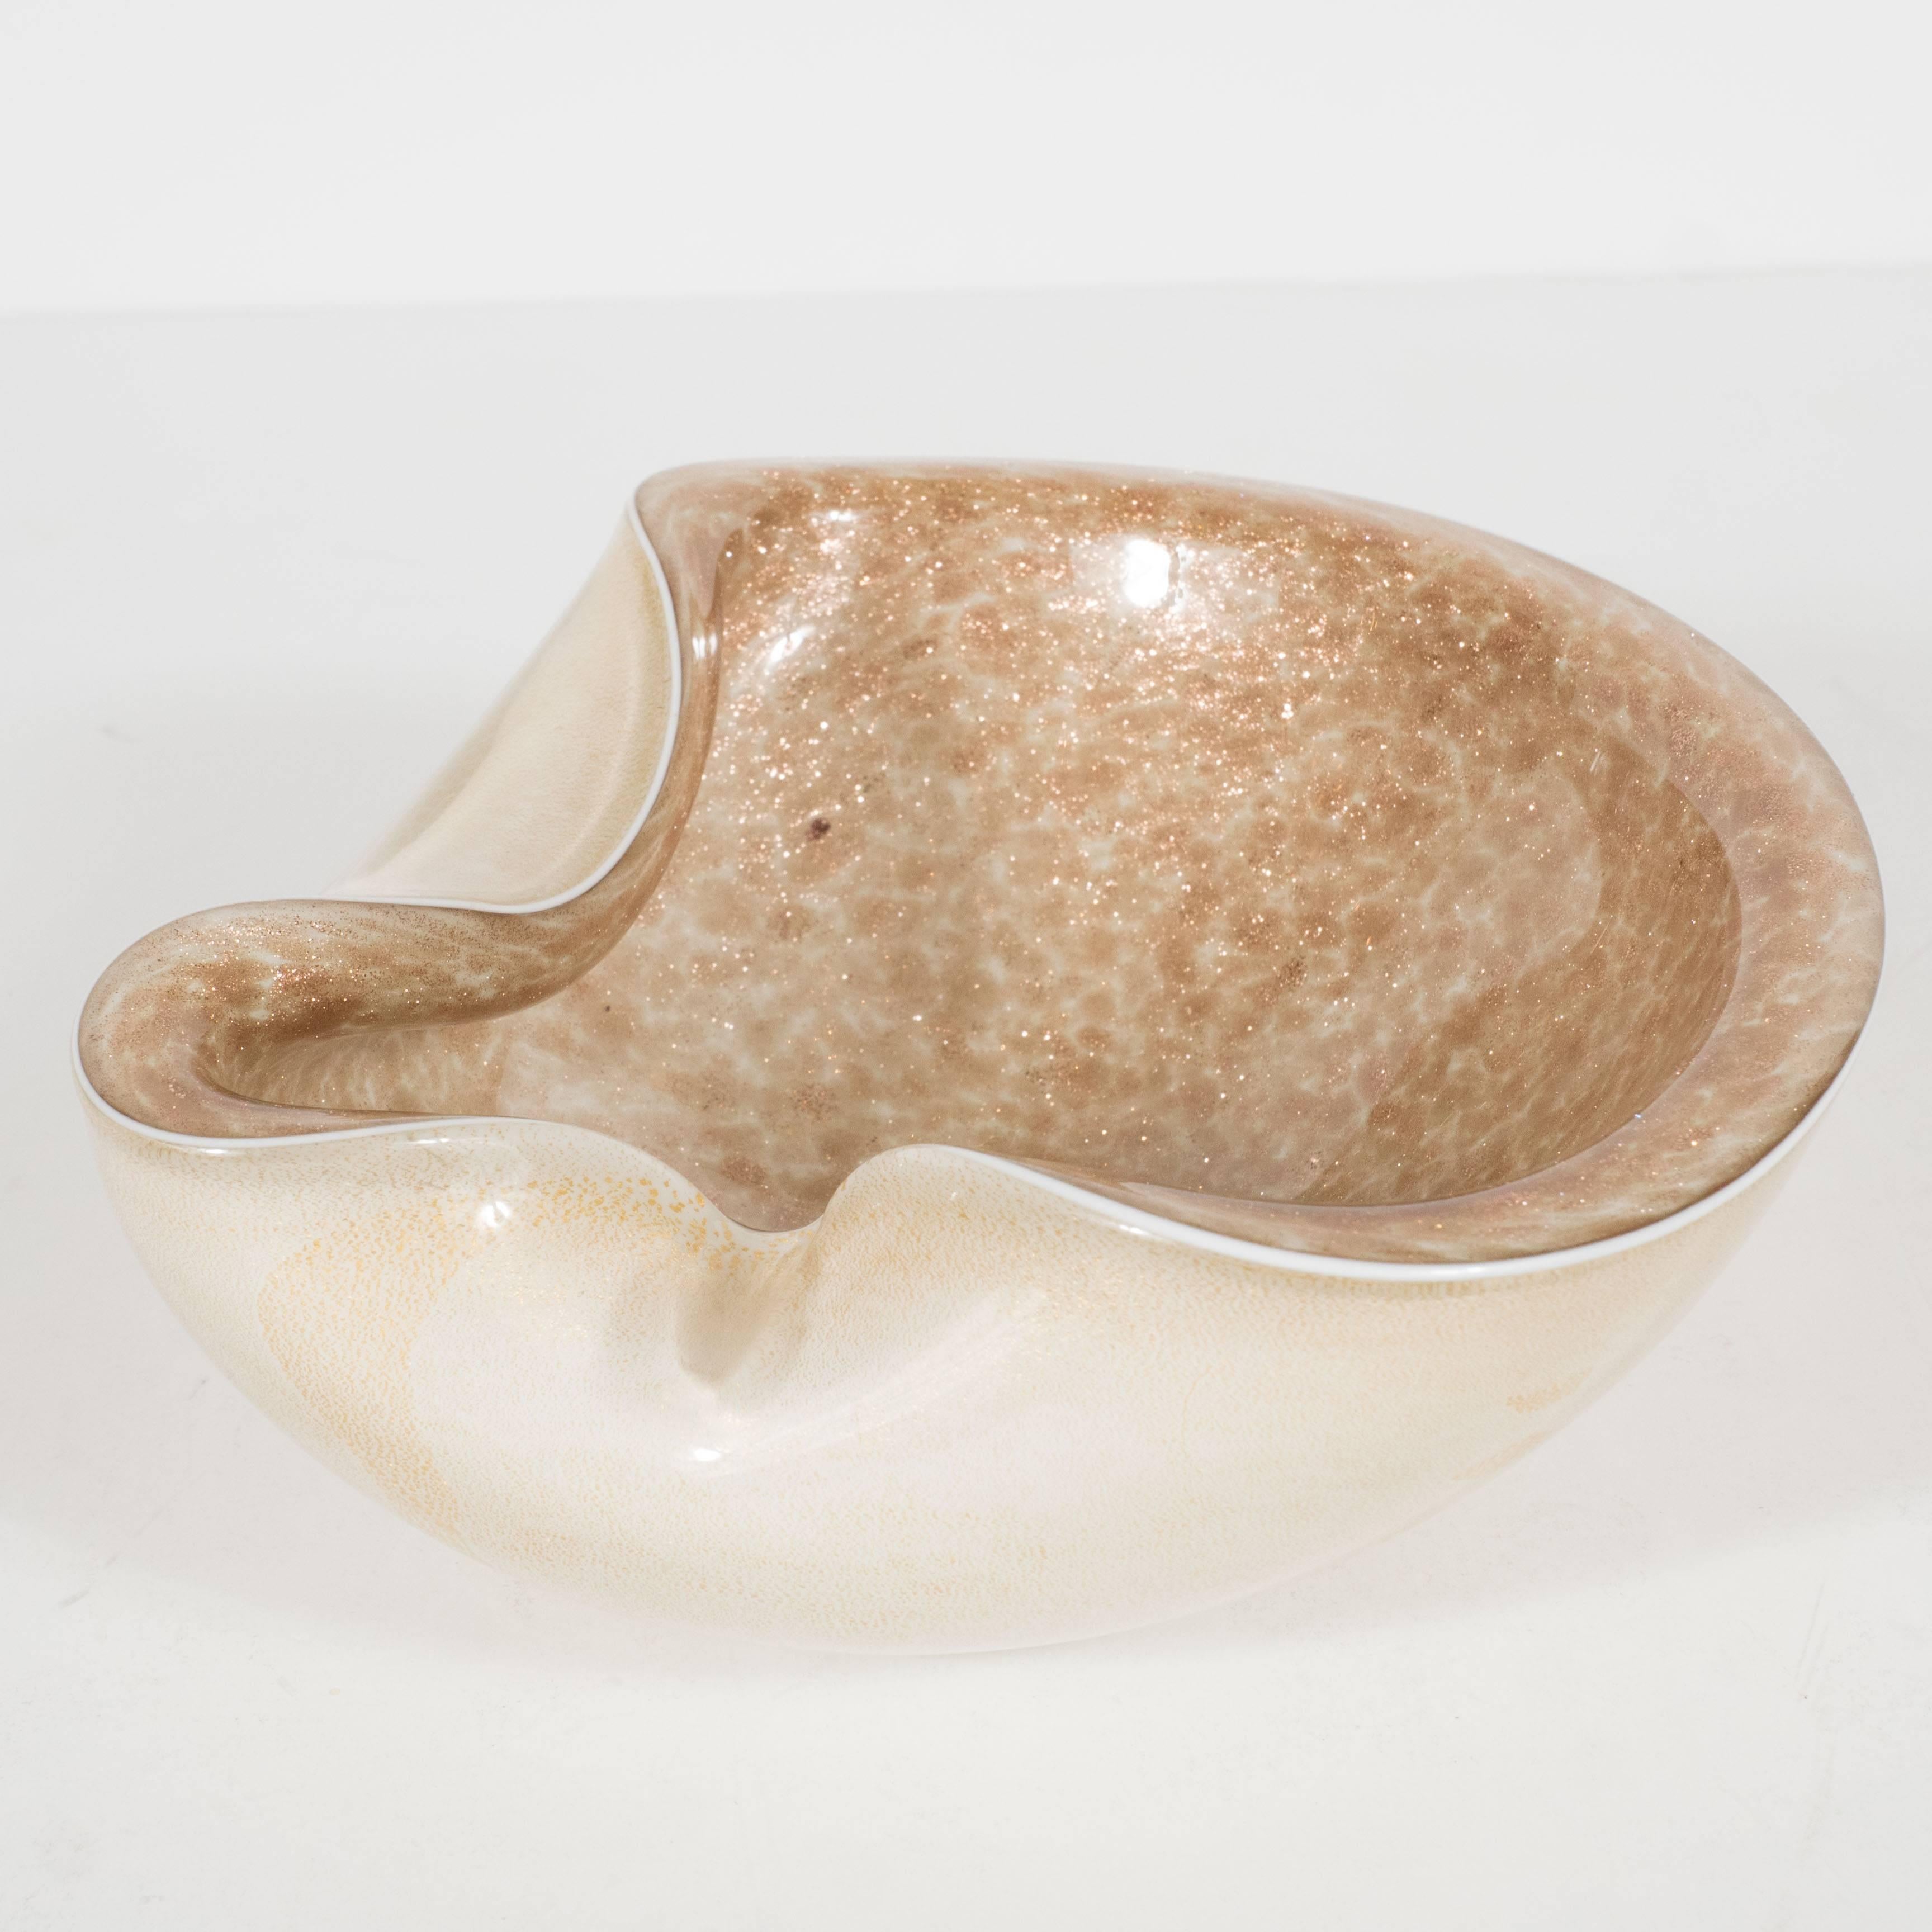 A Mid-Century Modernist bowl, objet or ashtray. This handblown piece of Murano glasswork features a clean, 24-karat yellow metallic gold exterior and speckled interior warm-hued interior. It is in excellent condition.
Made in Italy, circa